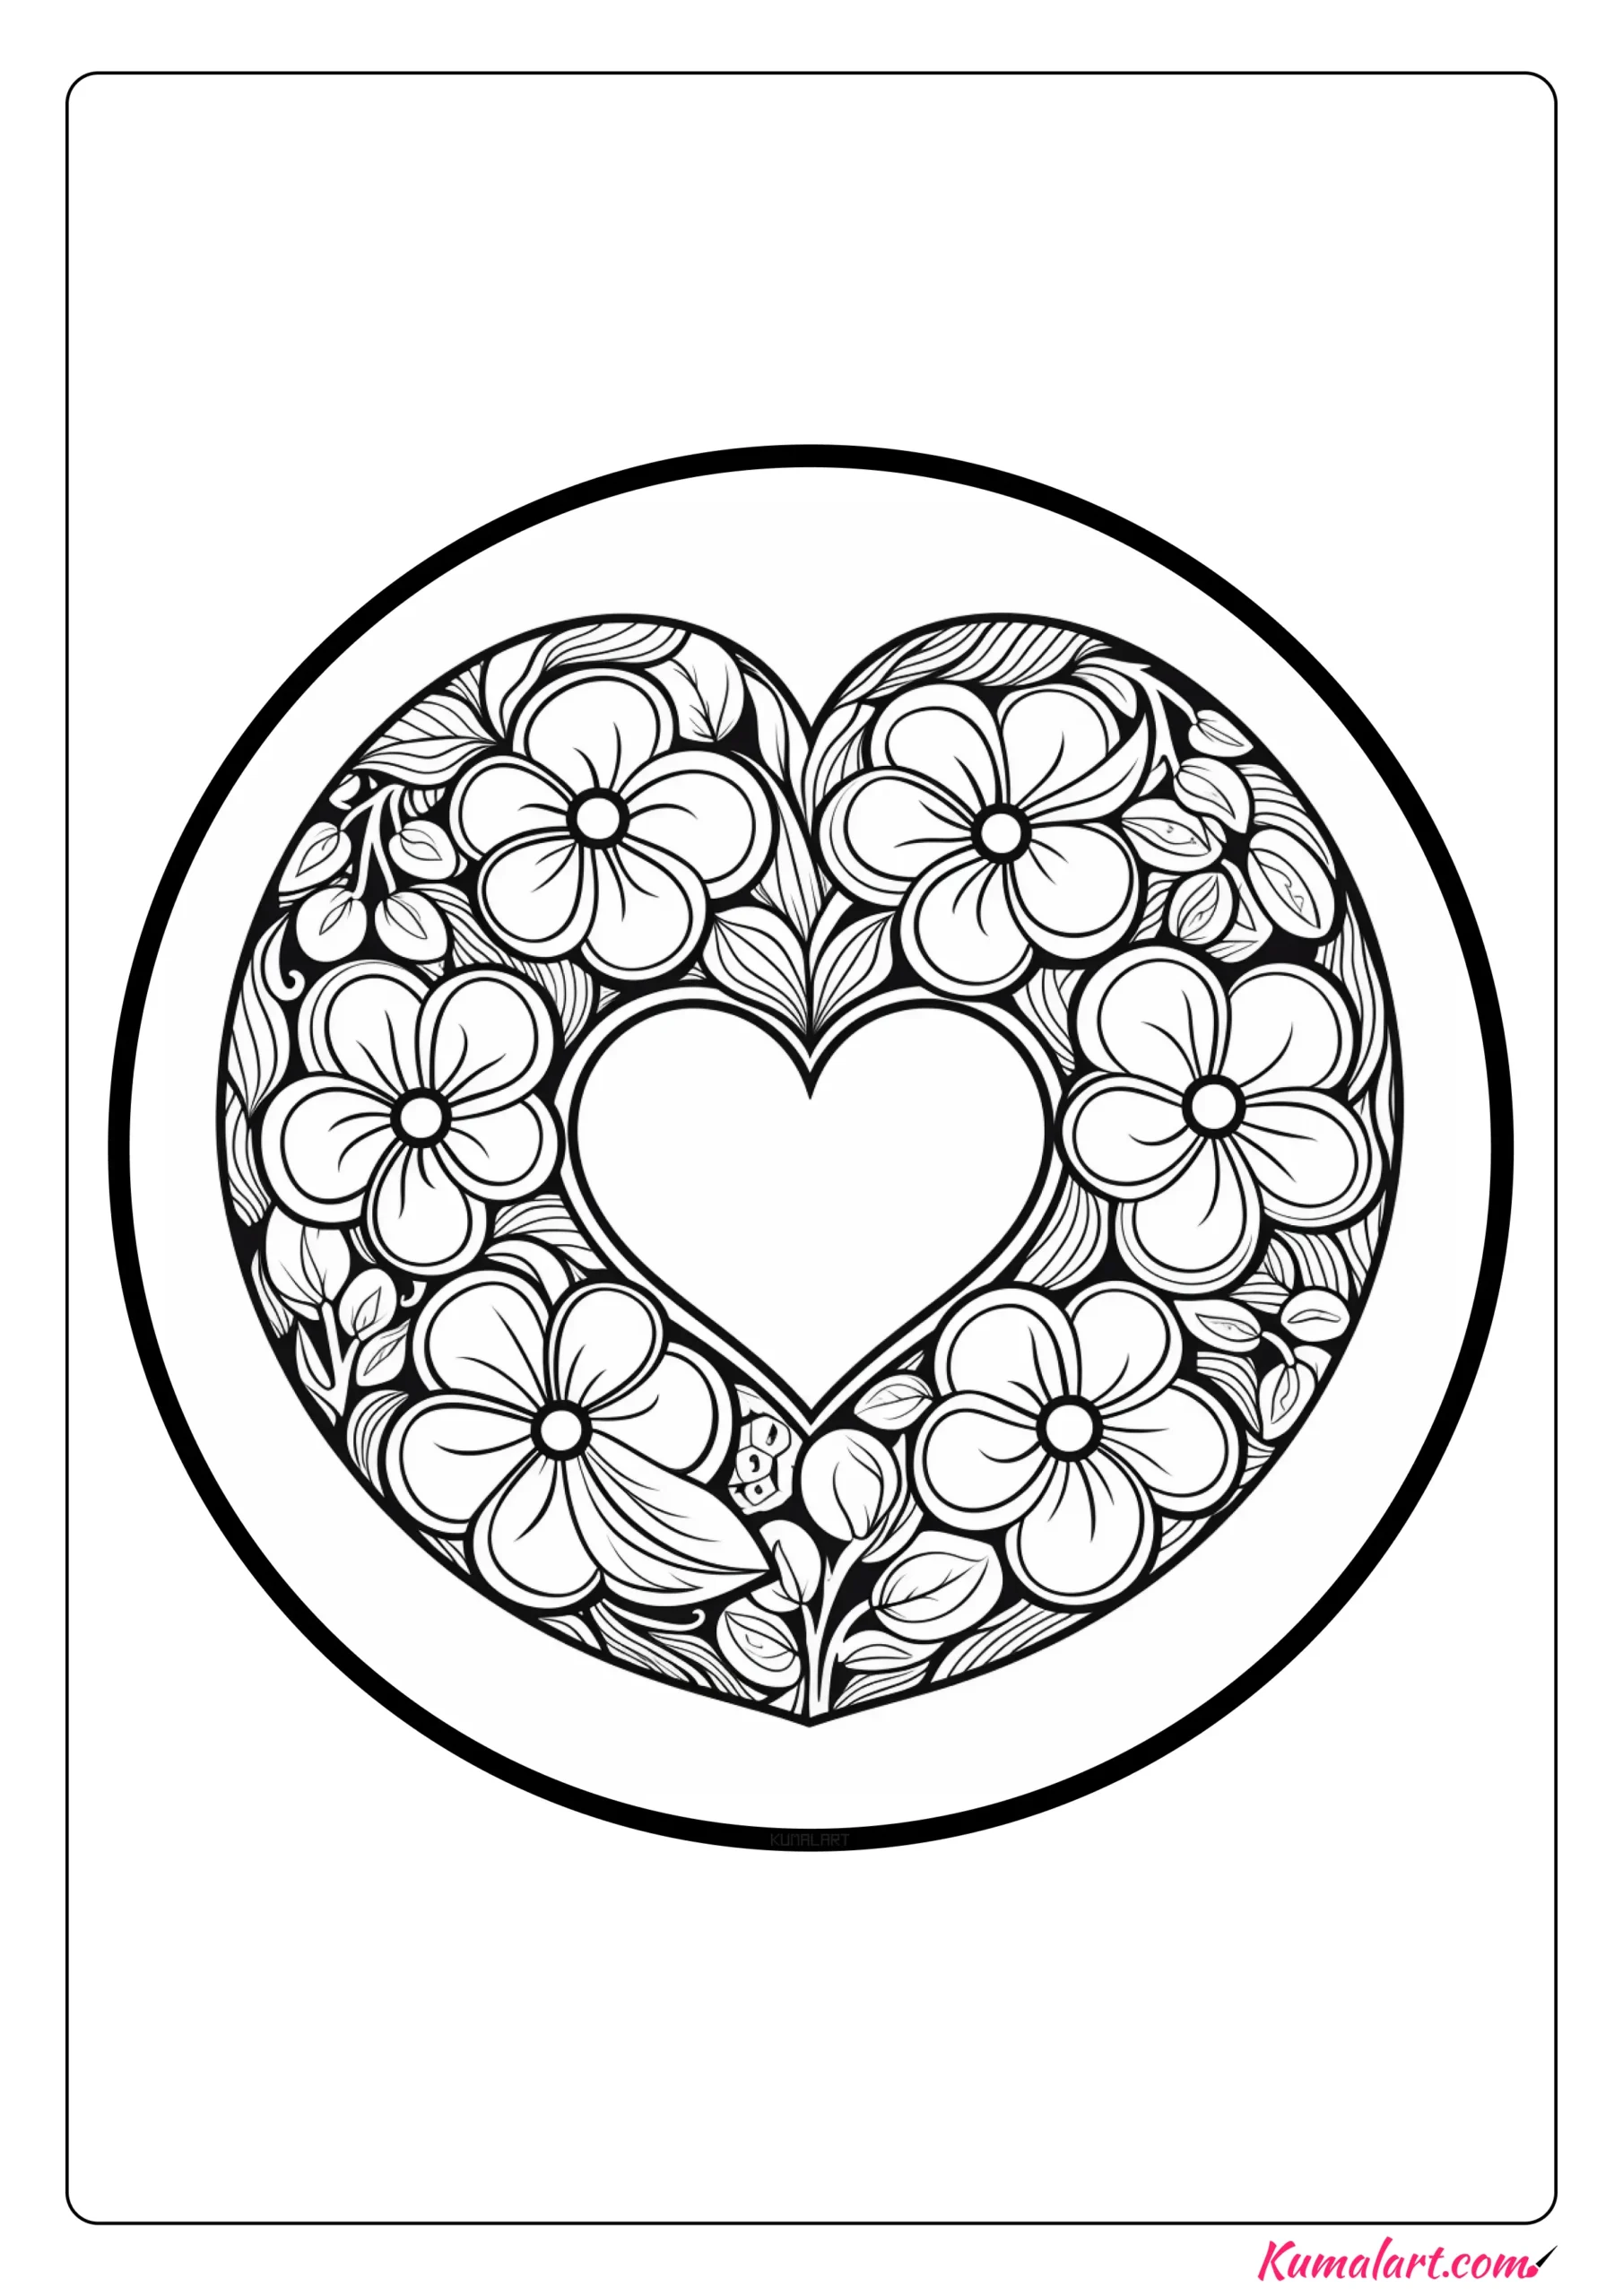 Heart Shaped Valentine’s Day Coloring Page